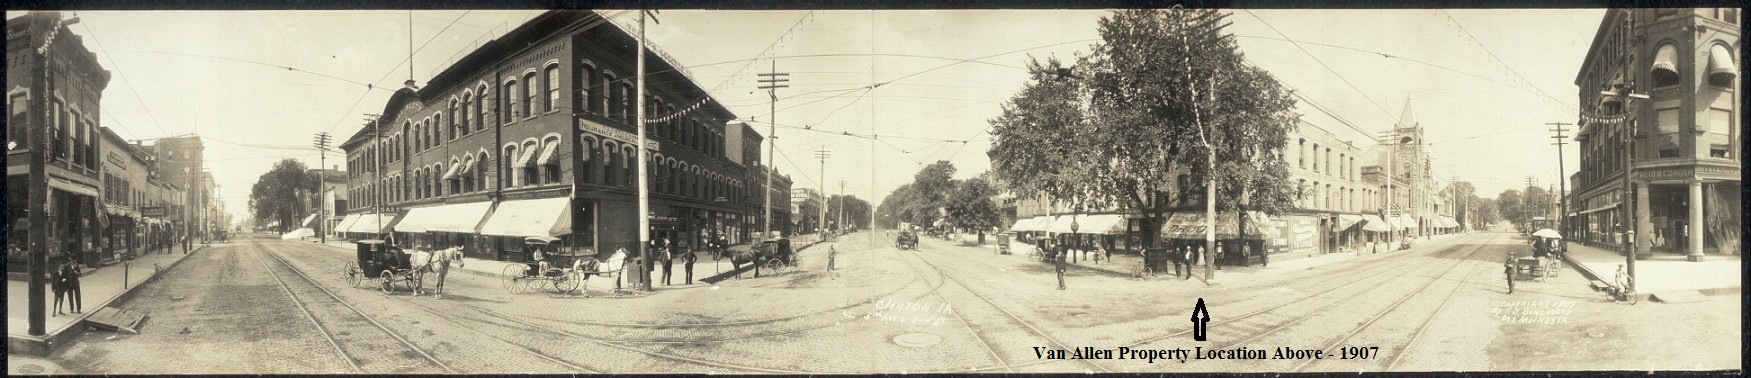 Van Allen building at 5th Ave S and S 2nd St 1907